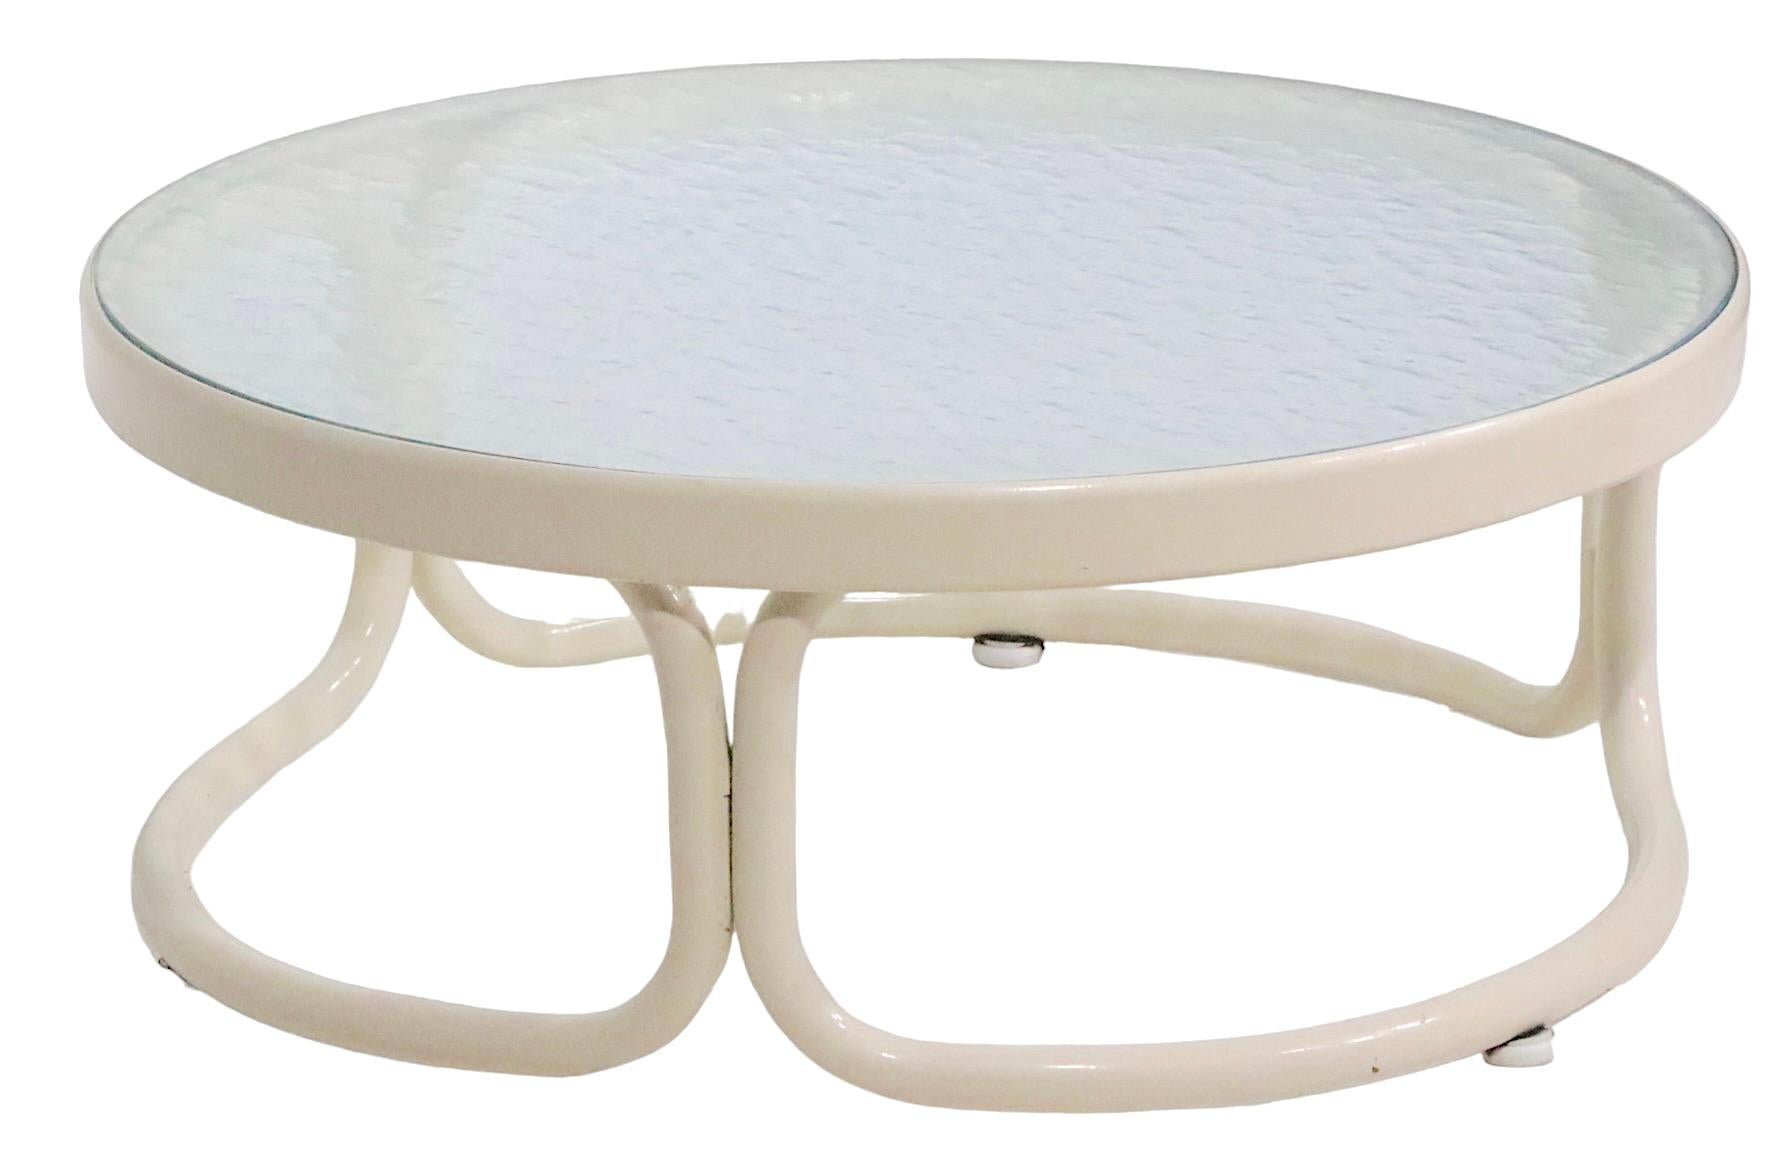 Vintage Poolside Patio Side Table with Aluminum Frame and Textured Glass Top In Good Condition For Sale In New York, NY